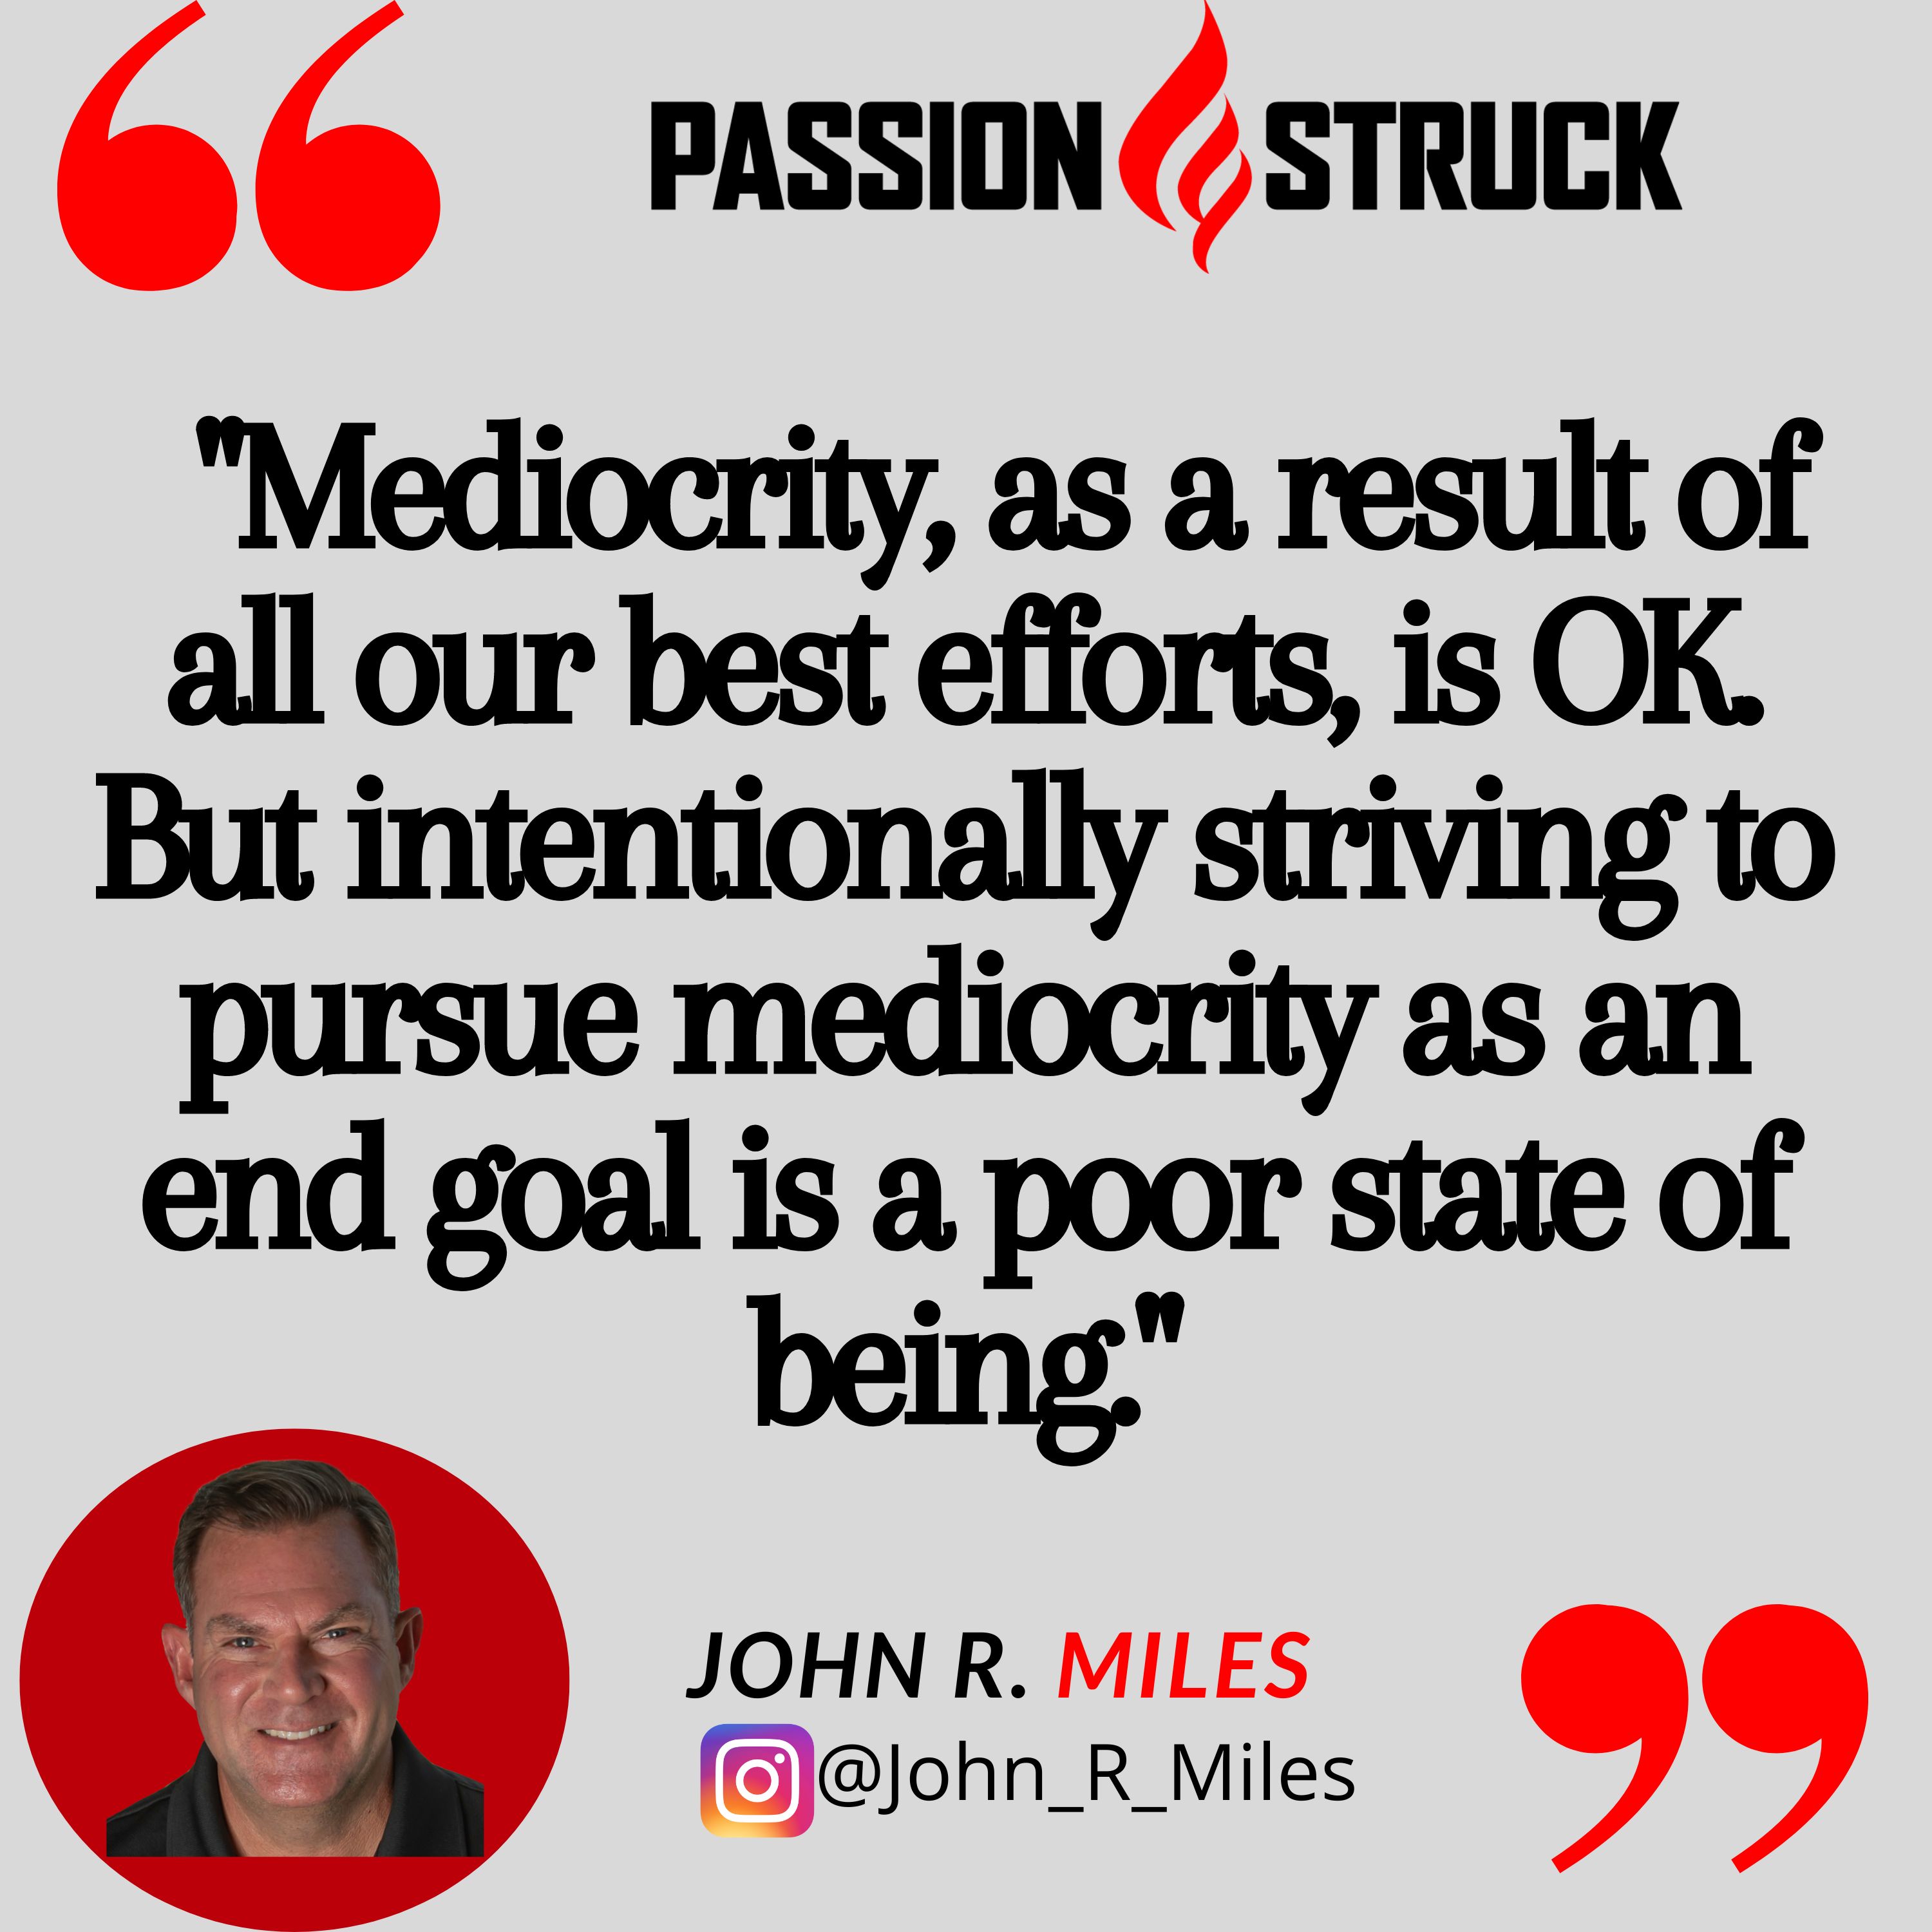 Quote by John R. Miles for the Passion Struck podcast on the culture of exceptionalism and why mediocrity as a result of all our best efforts is OK. 